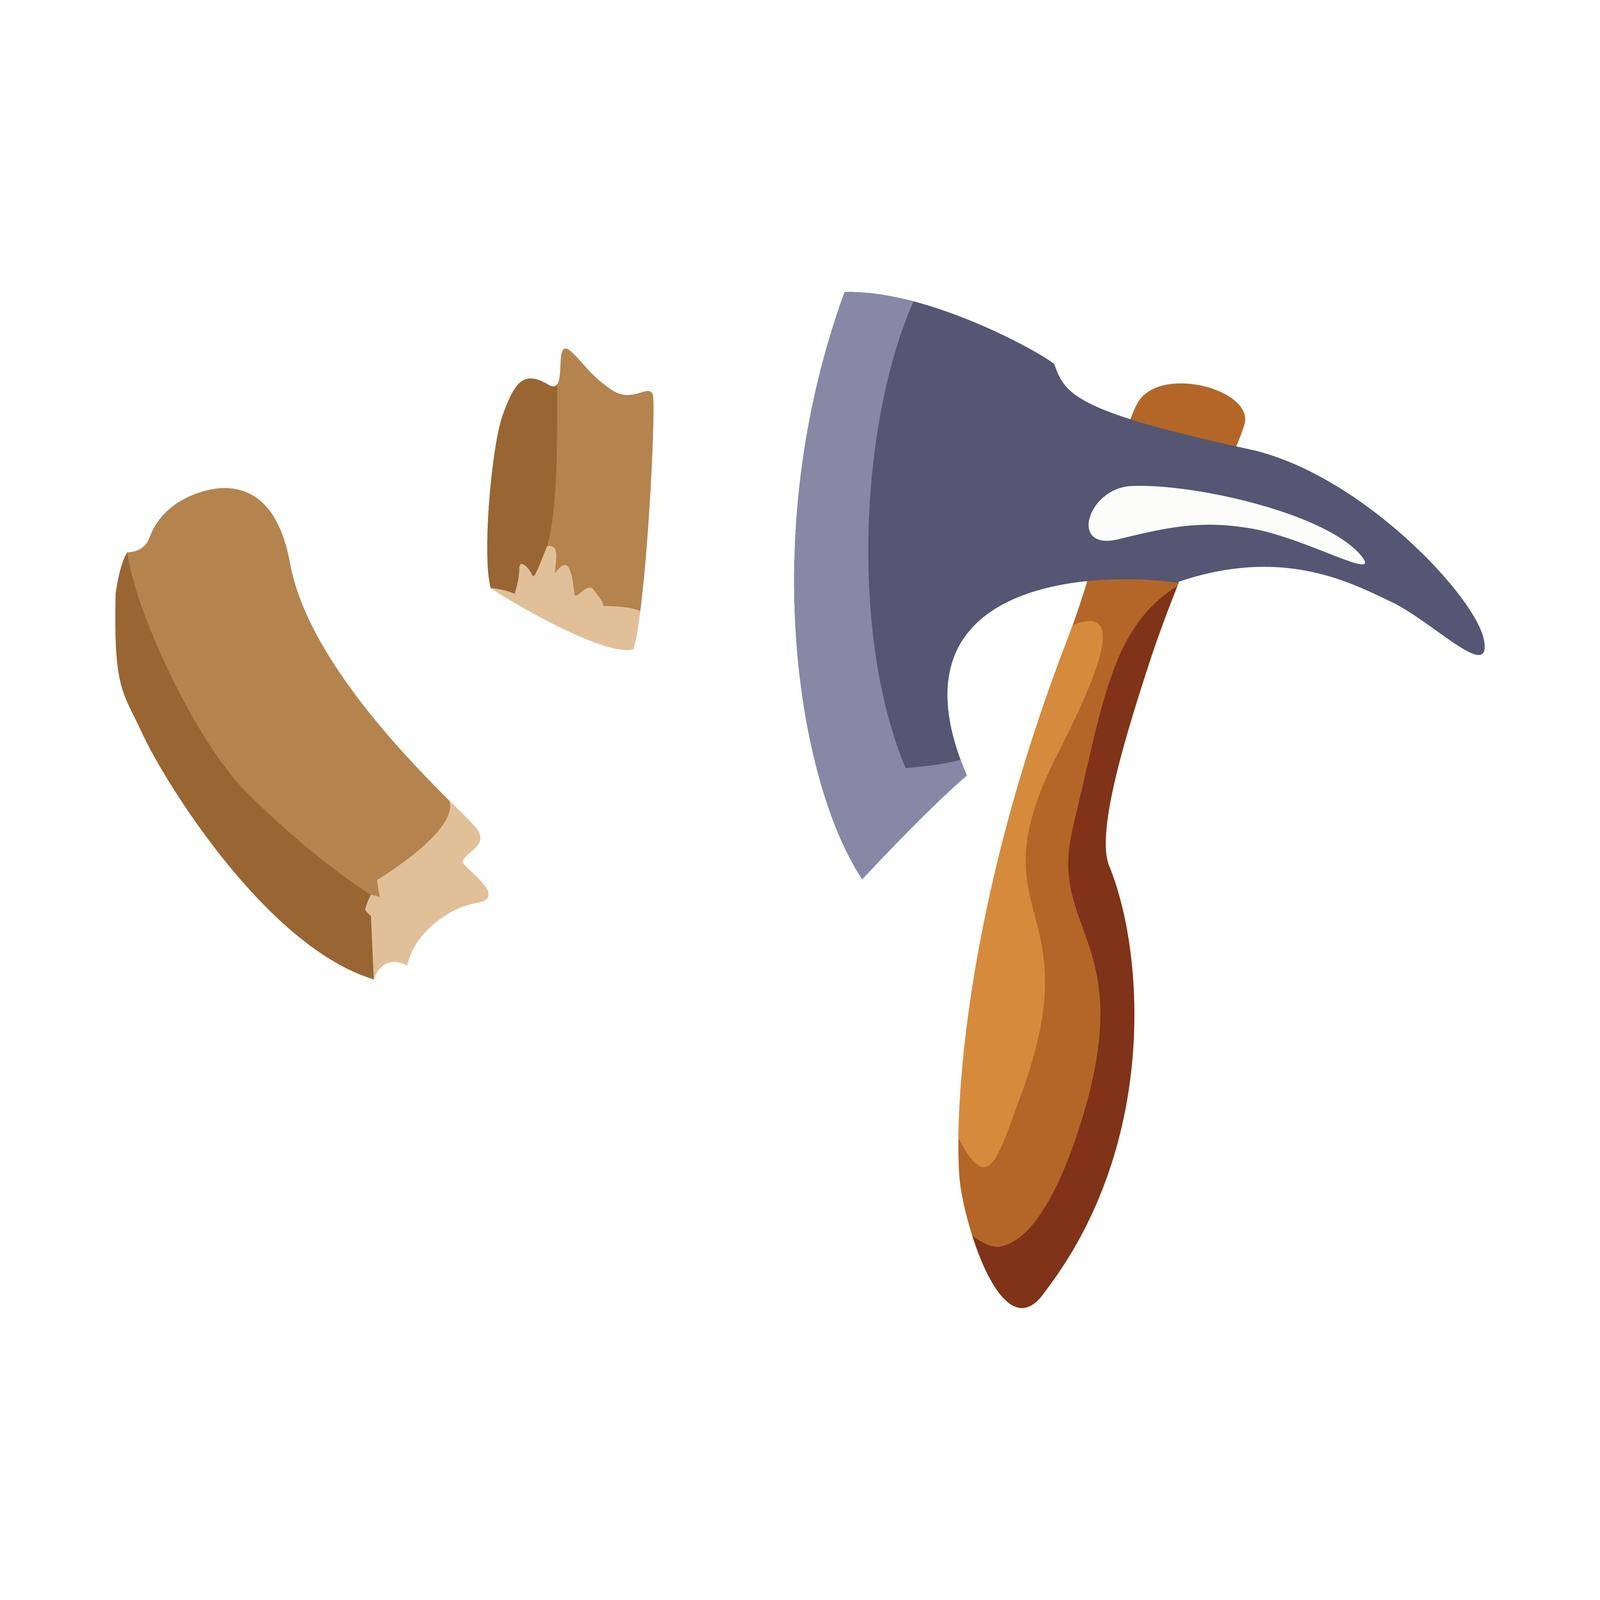 An axe with a wooden handle, which cuts wood vector illustration